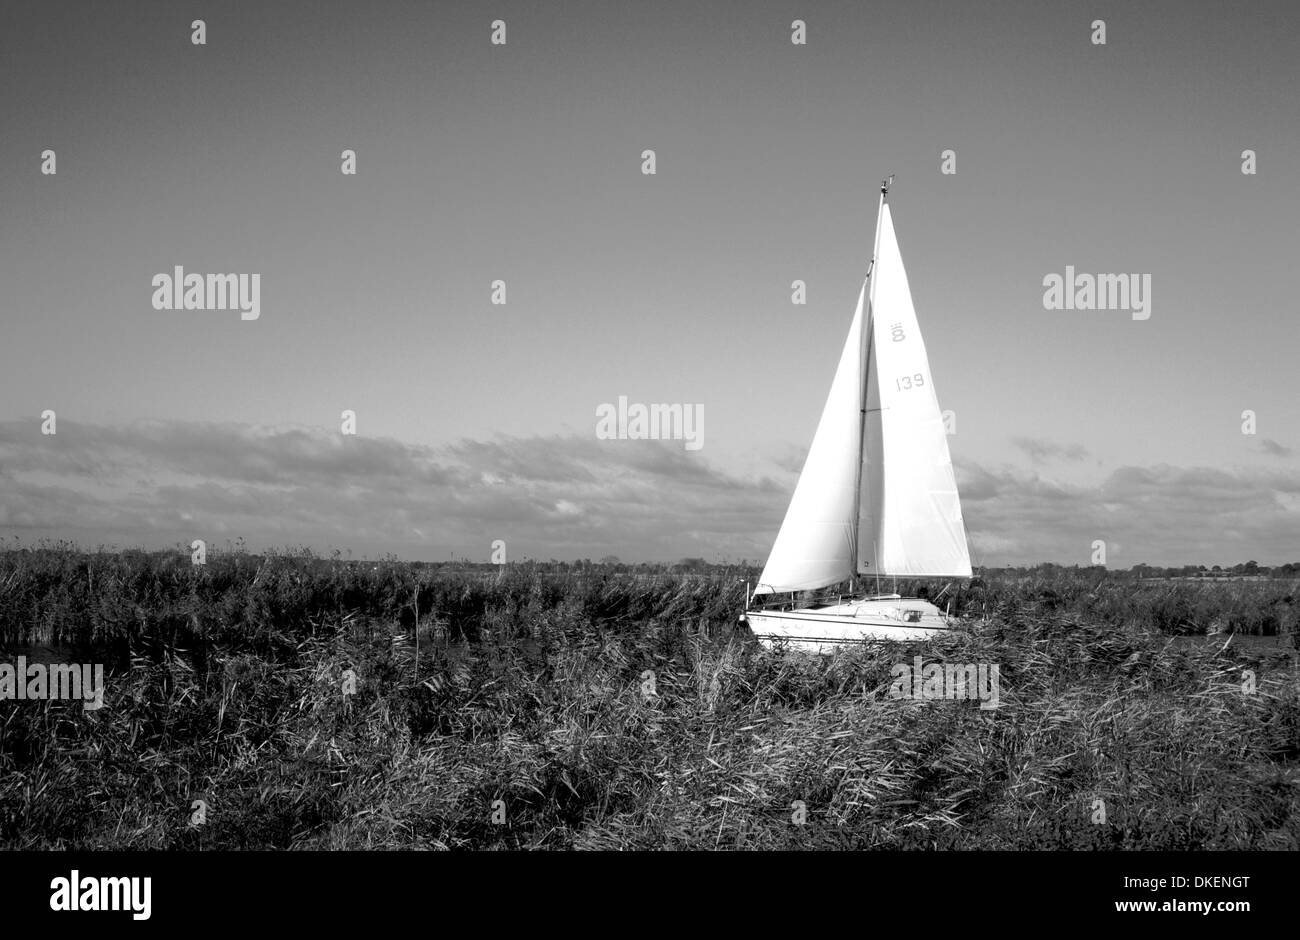 A yacht in sail on the Norfolk Broads at Thurne, Norfolk, England, United Kingdom. Stock Photo